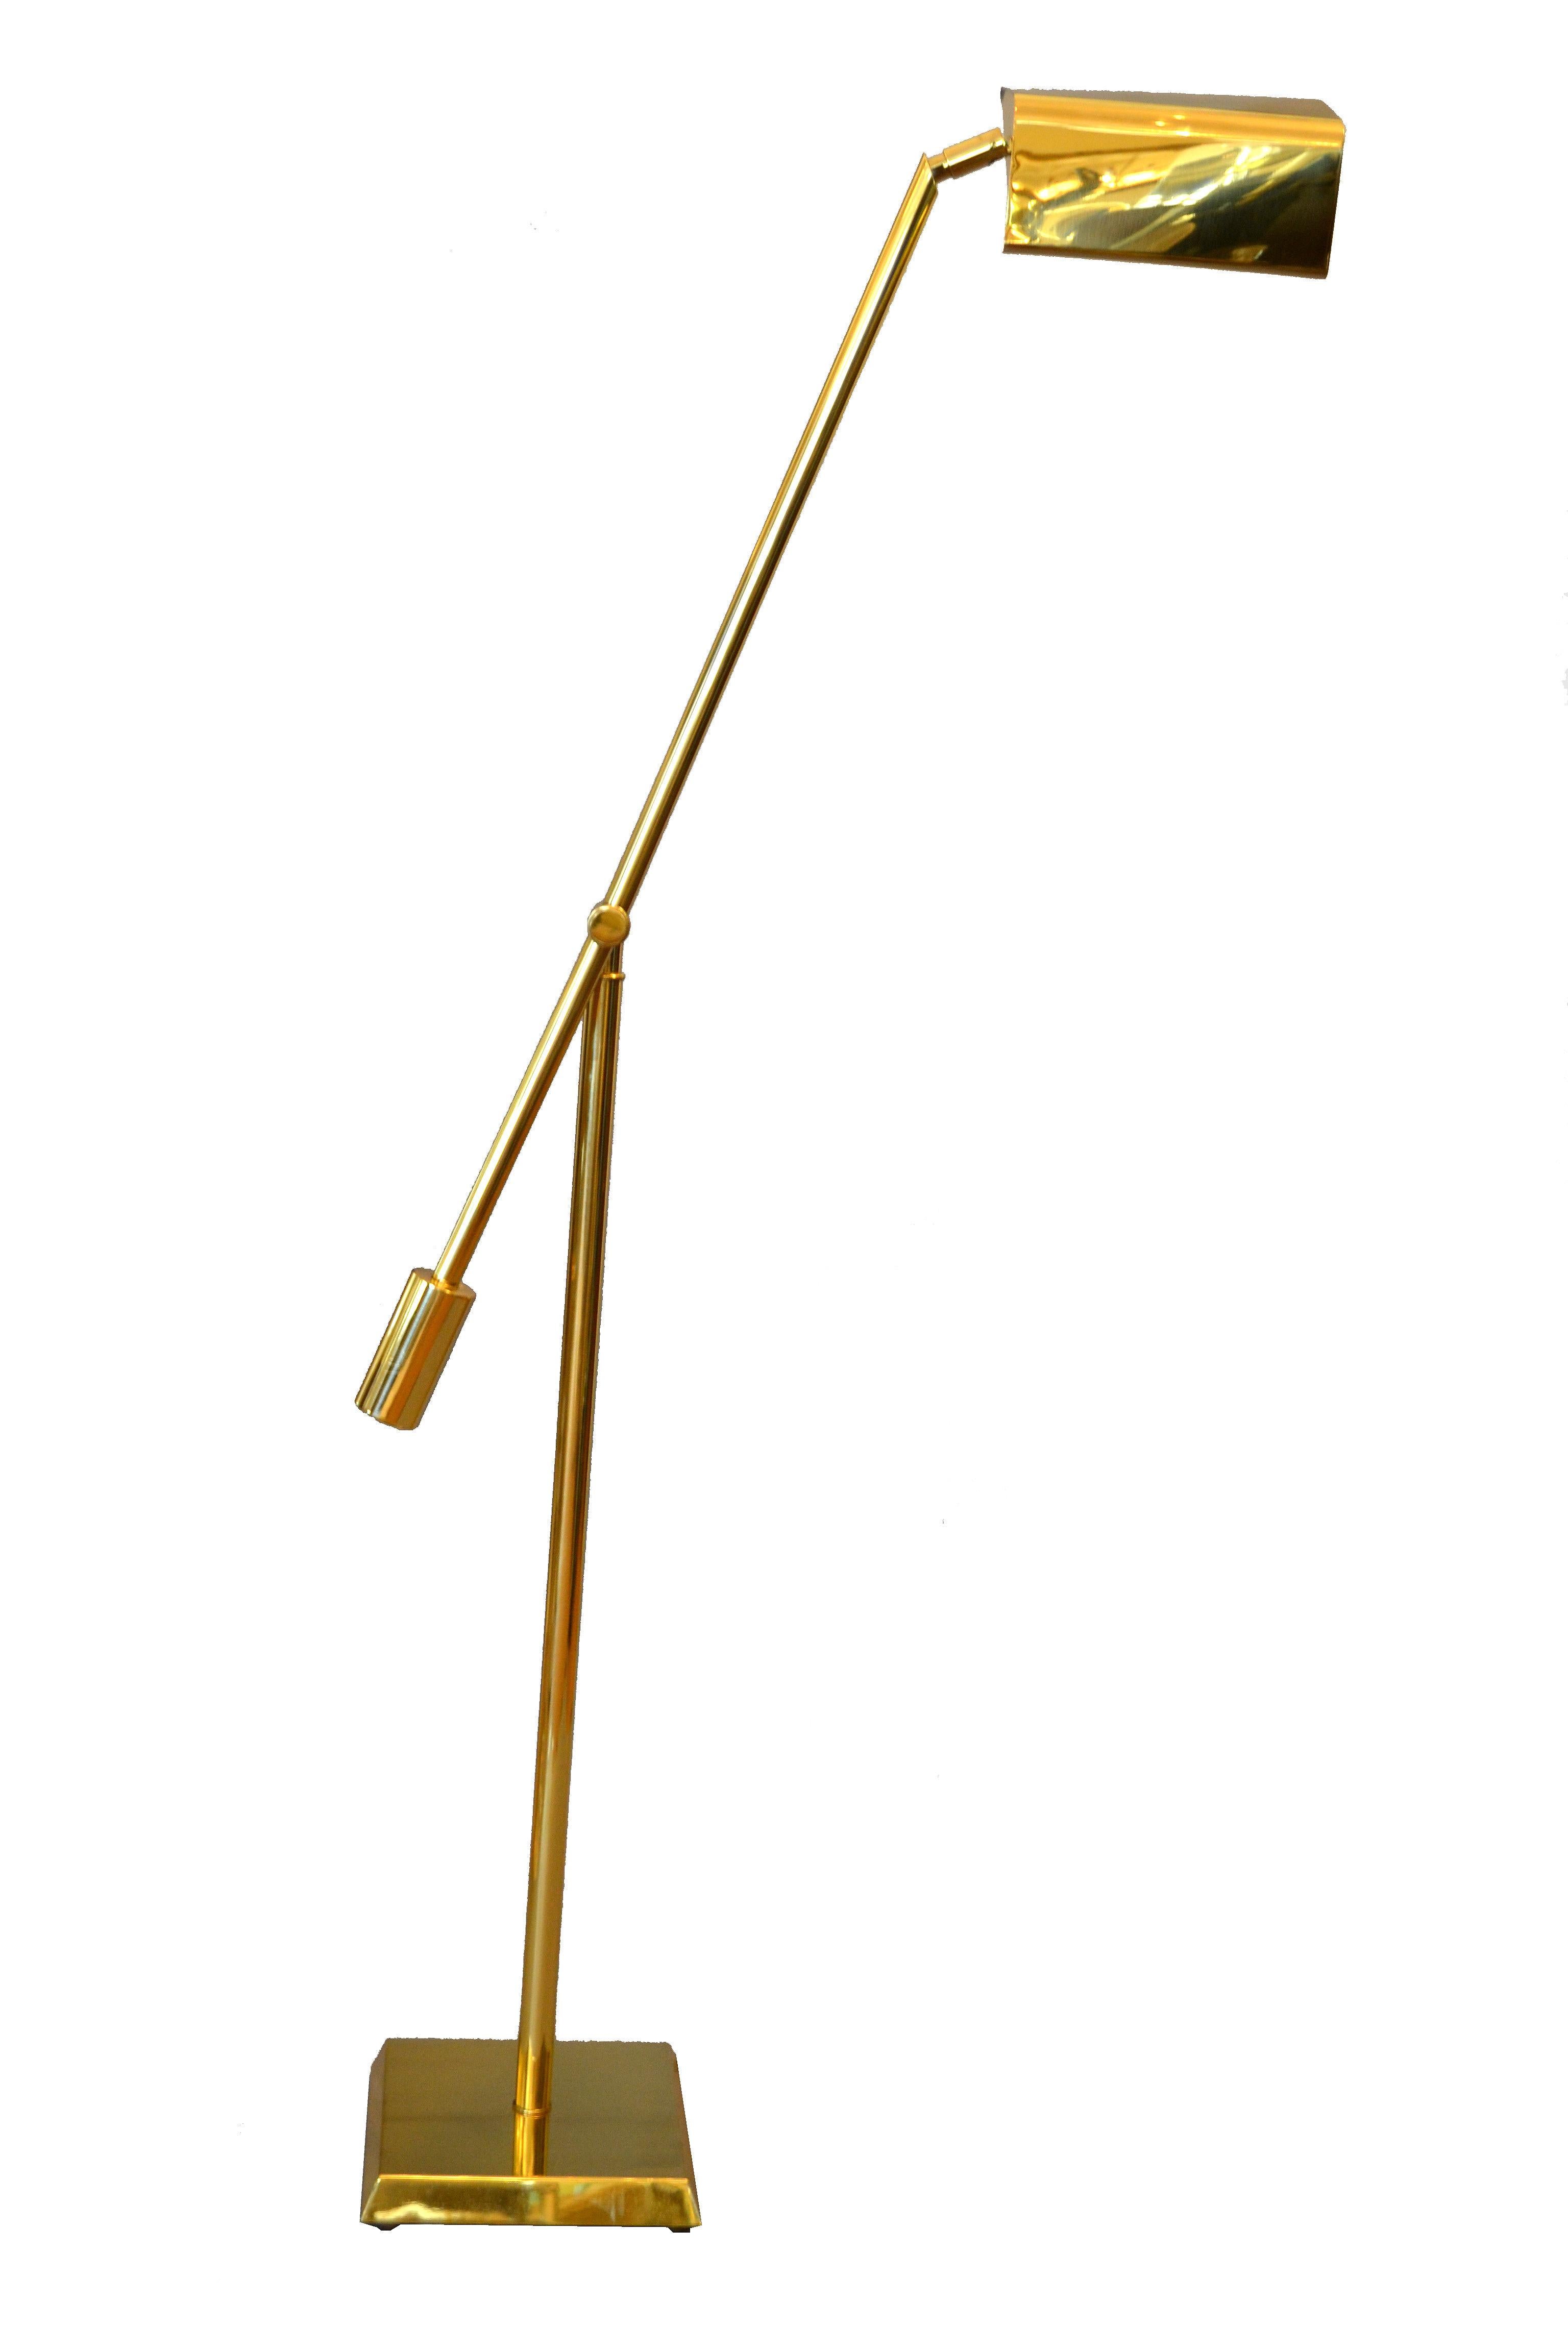 We offer a brass counter balanced floor lamp with a triangular shade and integral brass switch raised on a tube pole and slanted square base by Chapman.
The floor lamp can be adjusted to different angles.
Wired for the U.S. in perfect working